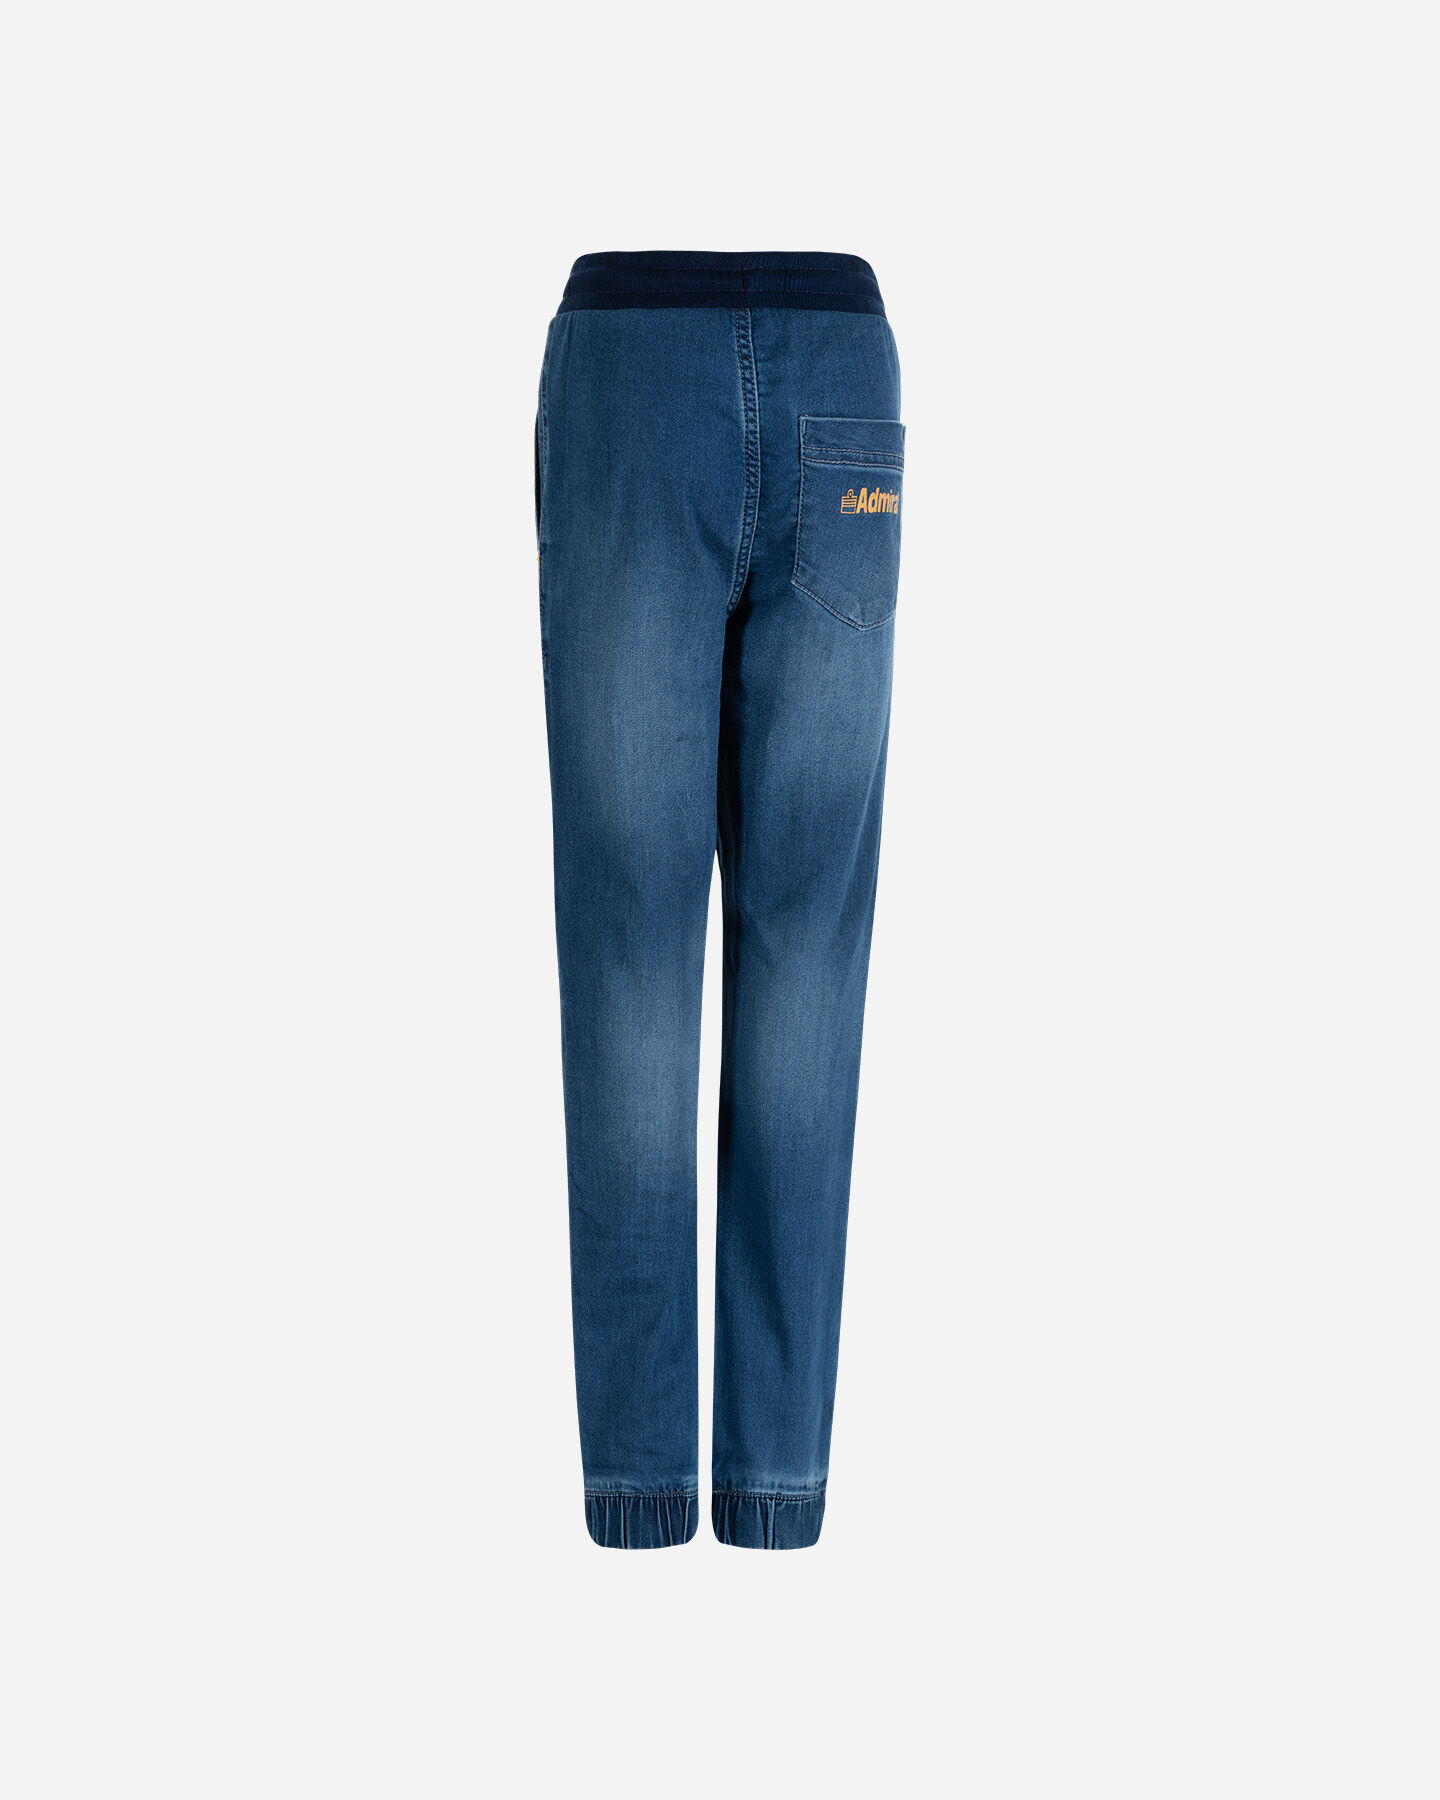  Jeans ADMIRAL LIFESTYLE JR S4106381|MDBLUE|12A scatto 1